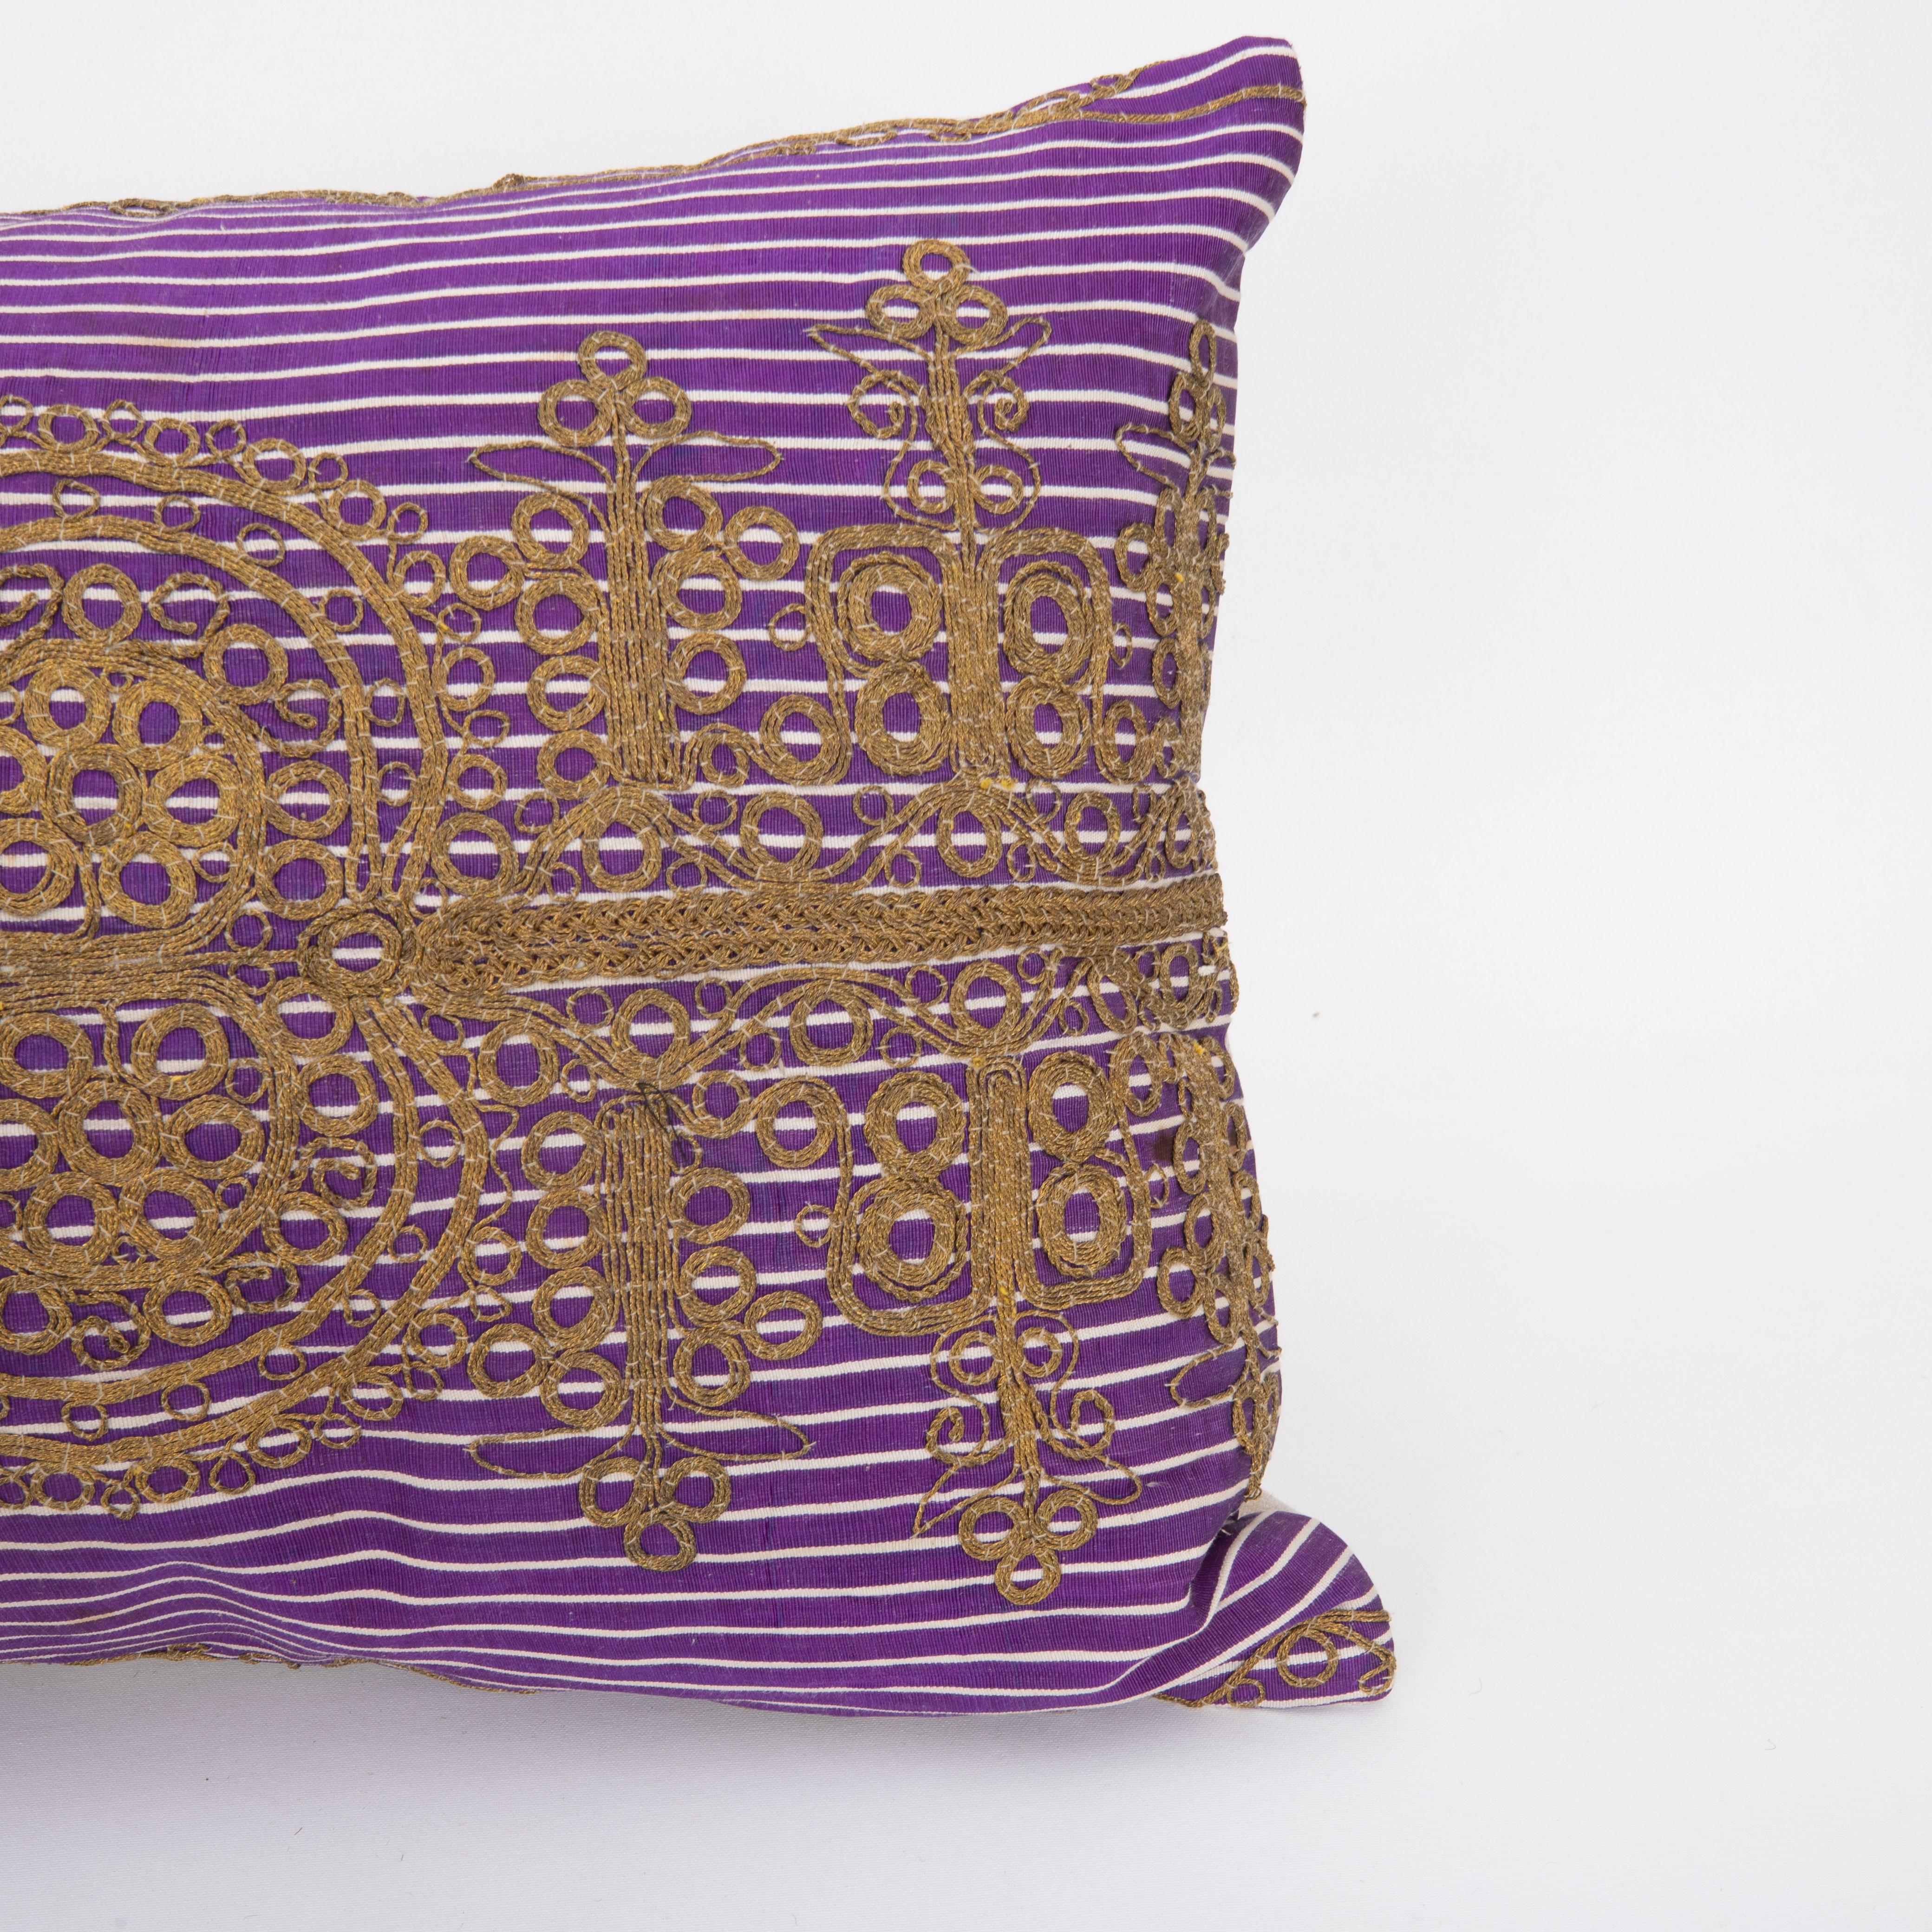 Hand-Woven Antique Ottoman Turkish Pillow Case, Early 20th C. For Sale